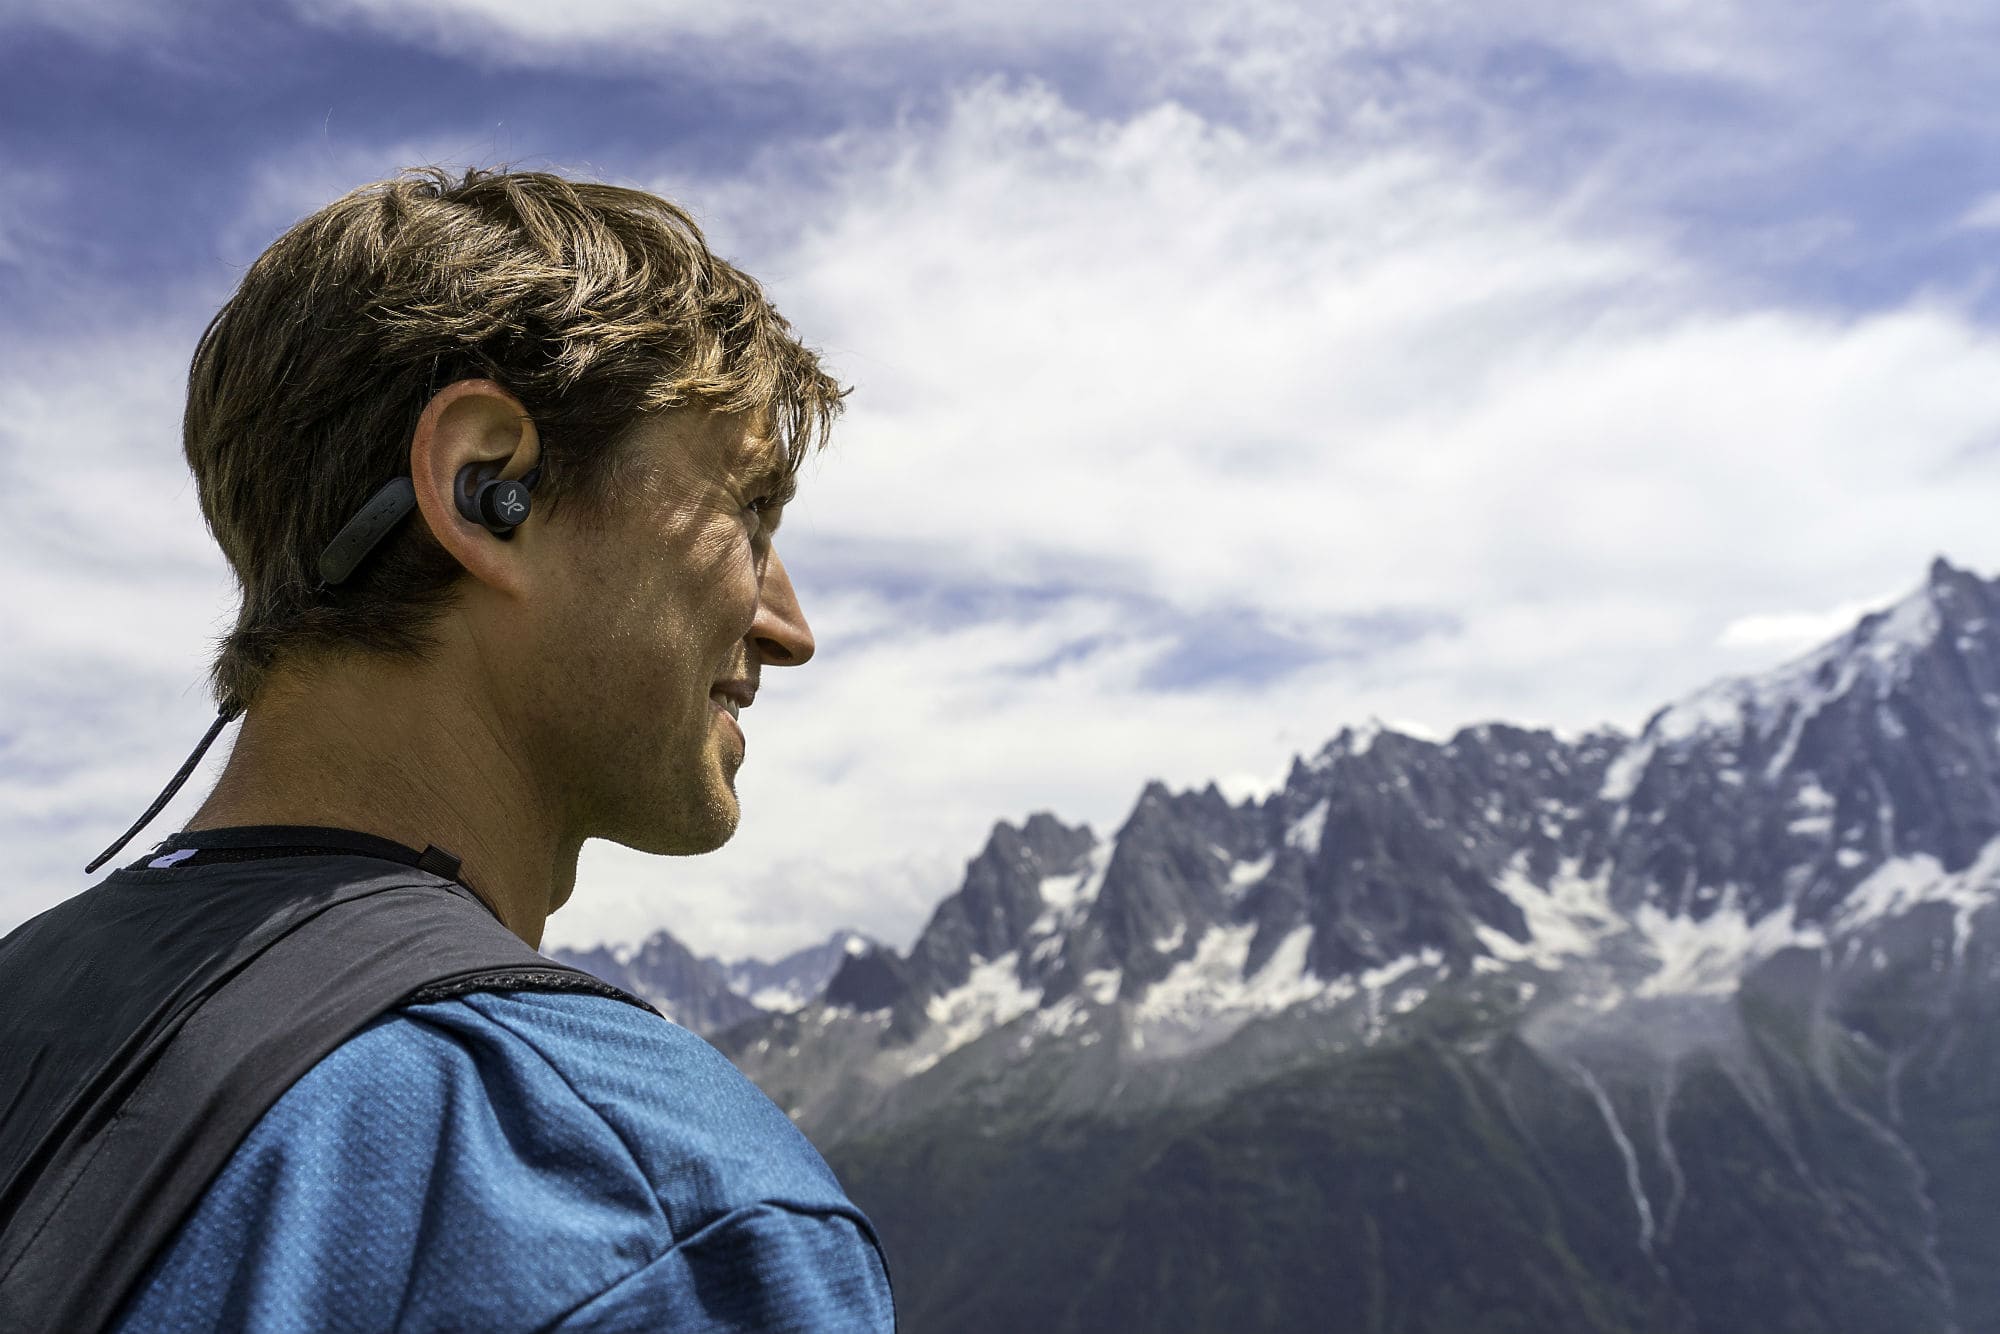 Tarah Pro sports earbuds are up to almost any adventure.